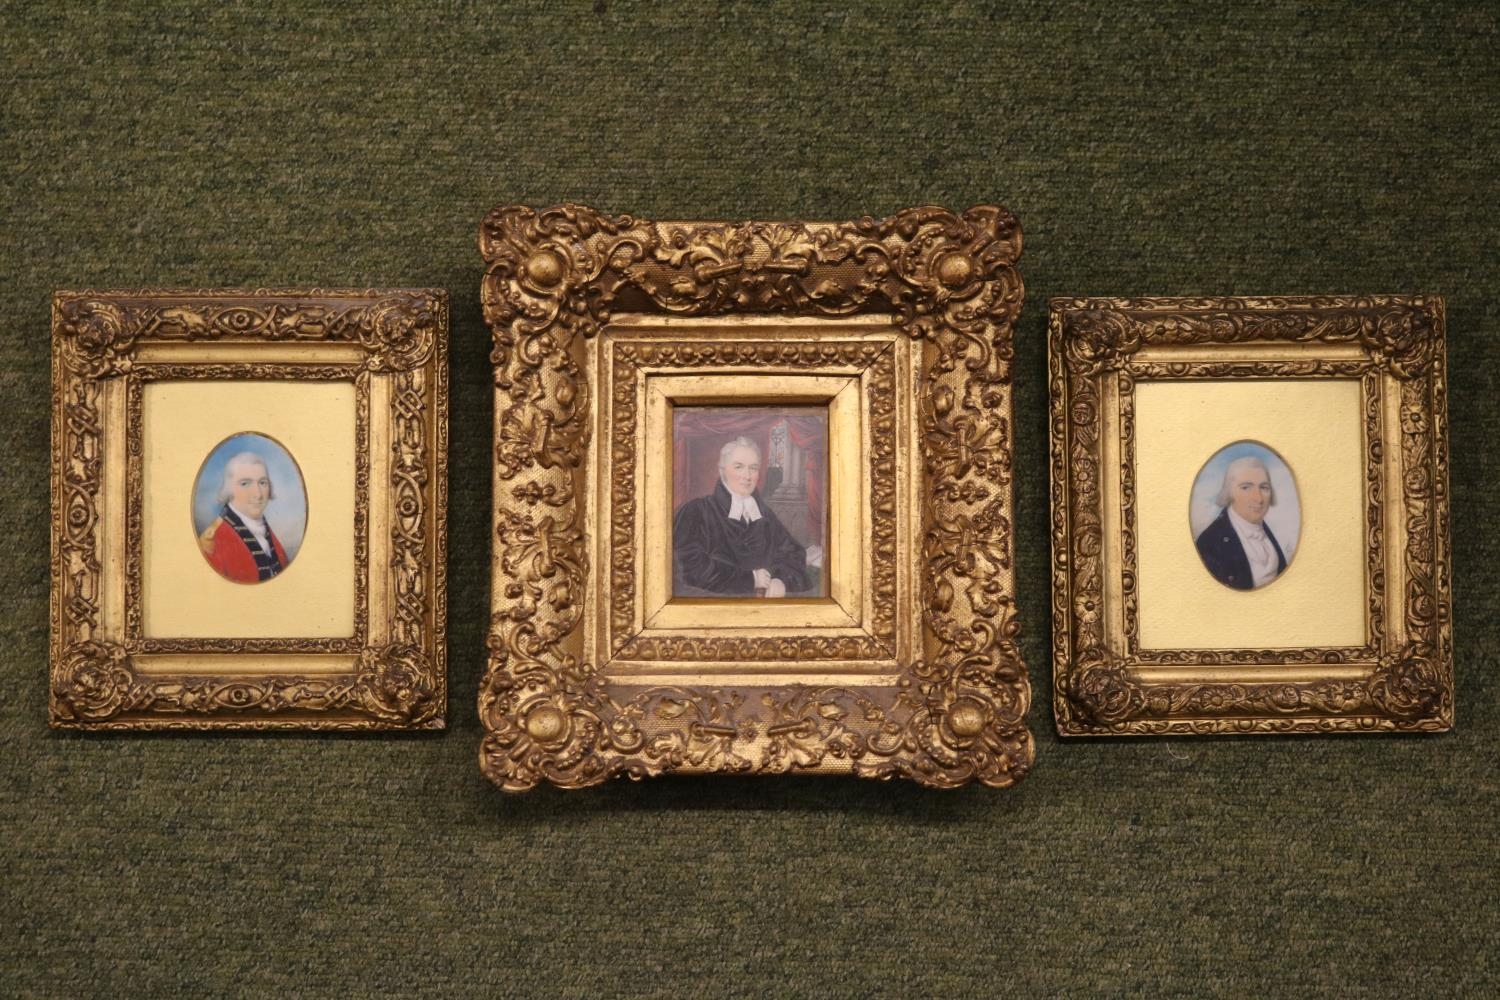 Collection of 2 18thC Miniature Portraits of a Gentleman in Grenadier uniform and a watercolour of a - Image 2 of 8